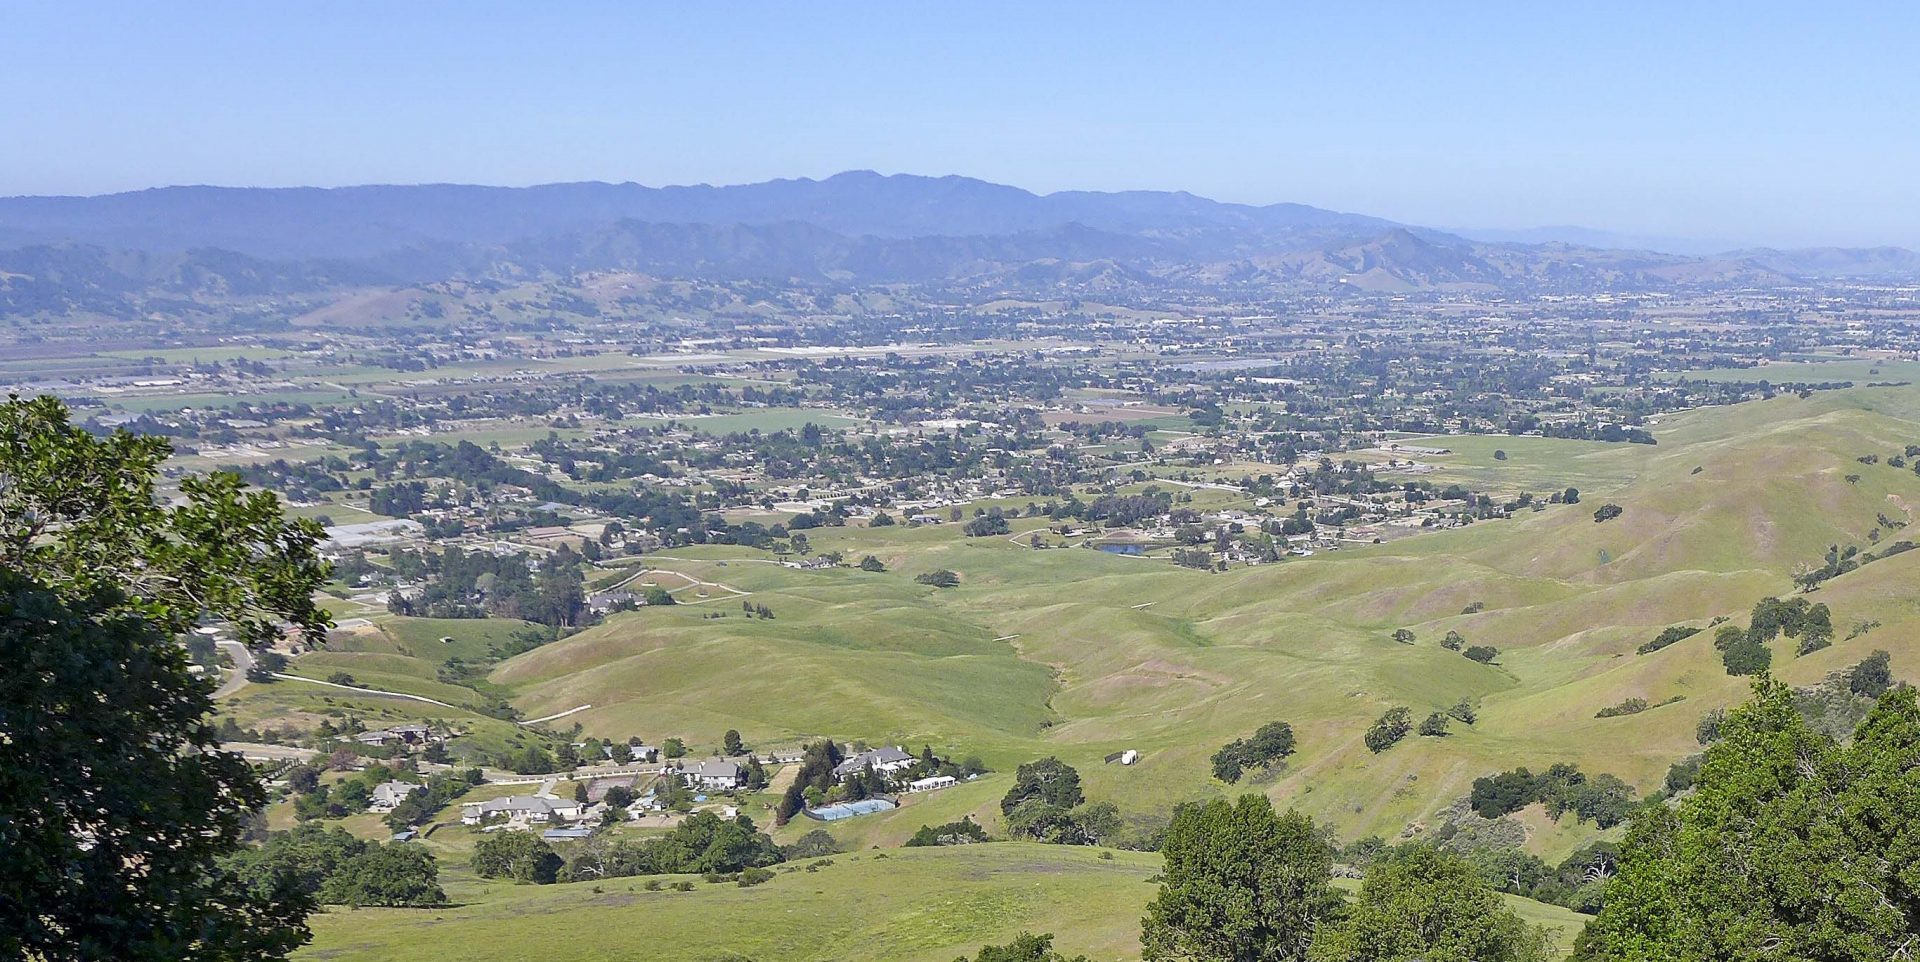 Speak Up for Responsible Growth in Gilroy